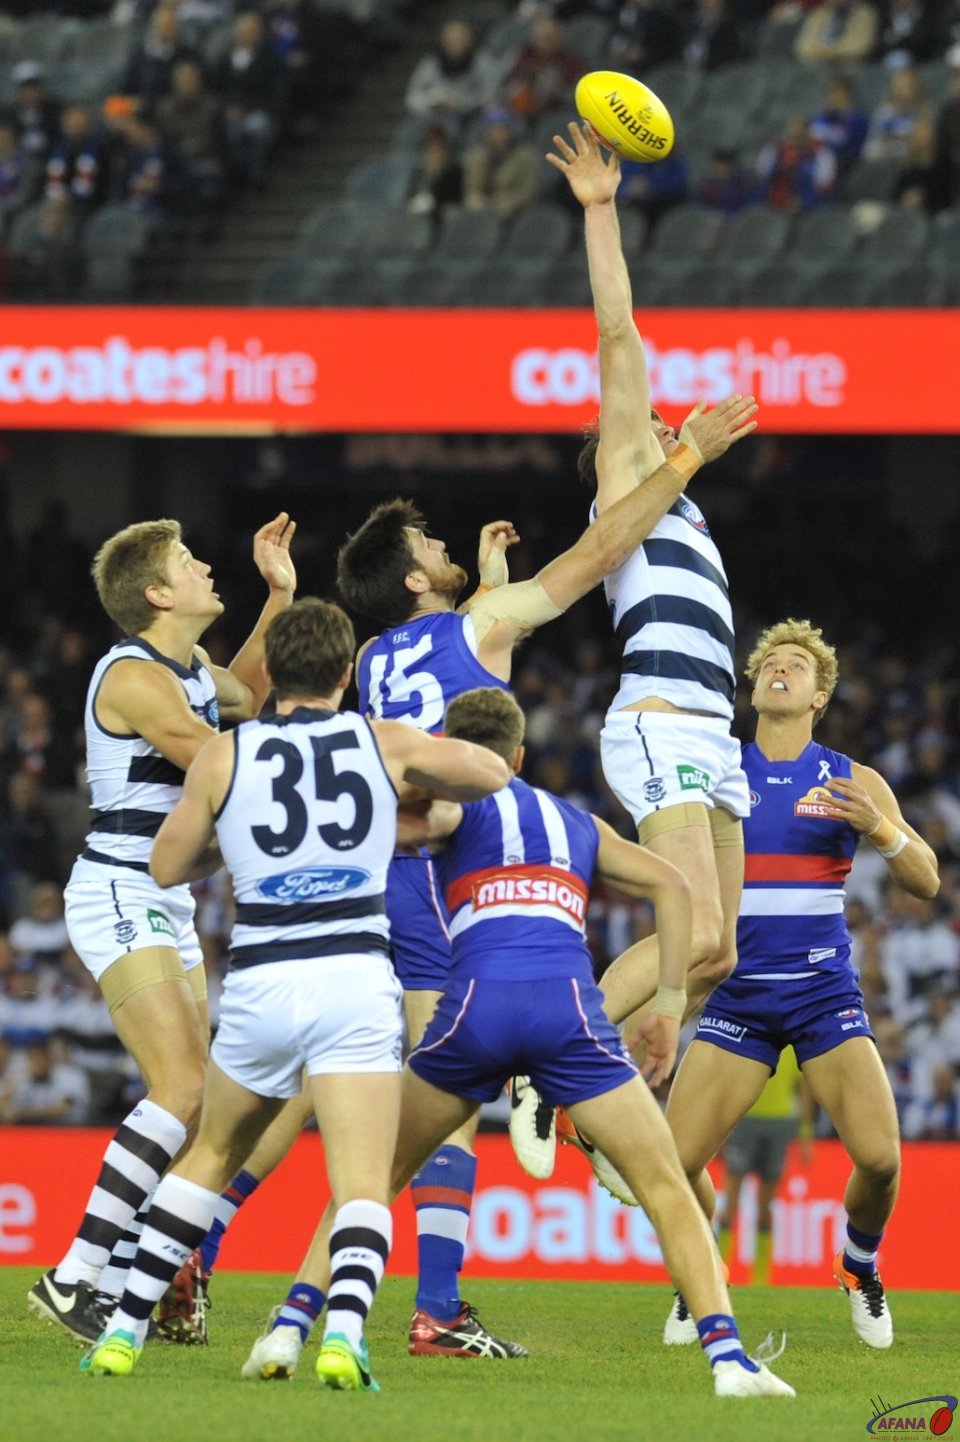 Mark Blicavs ruck tap out over Tom Campbell